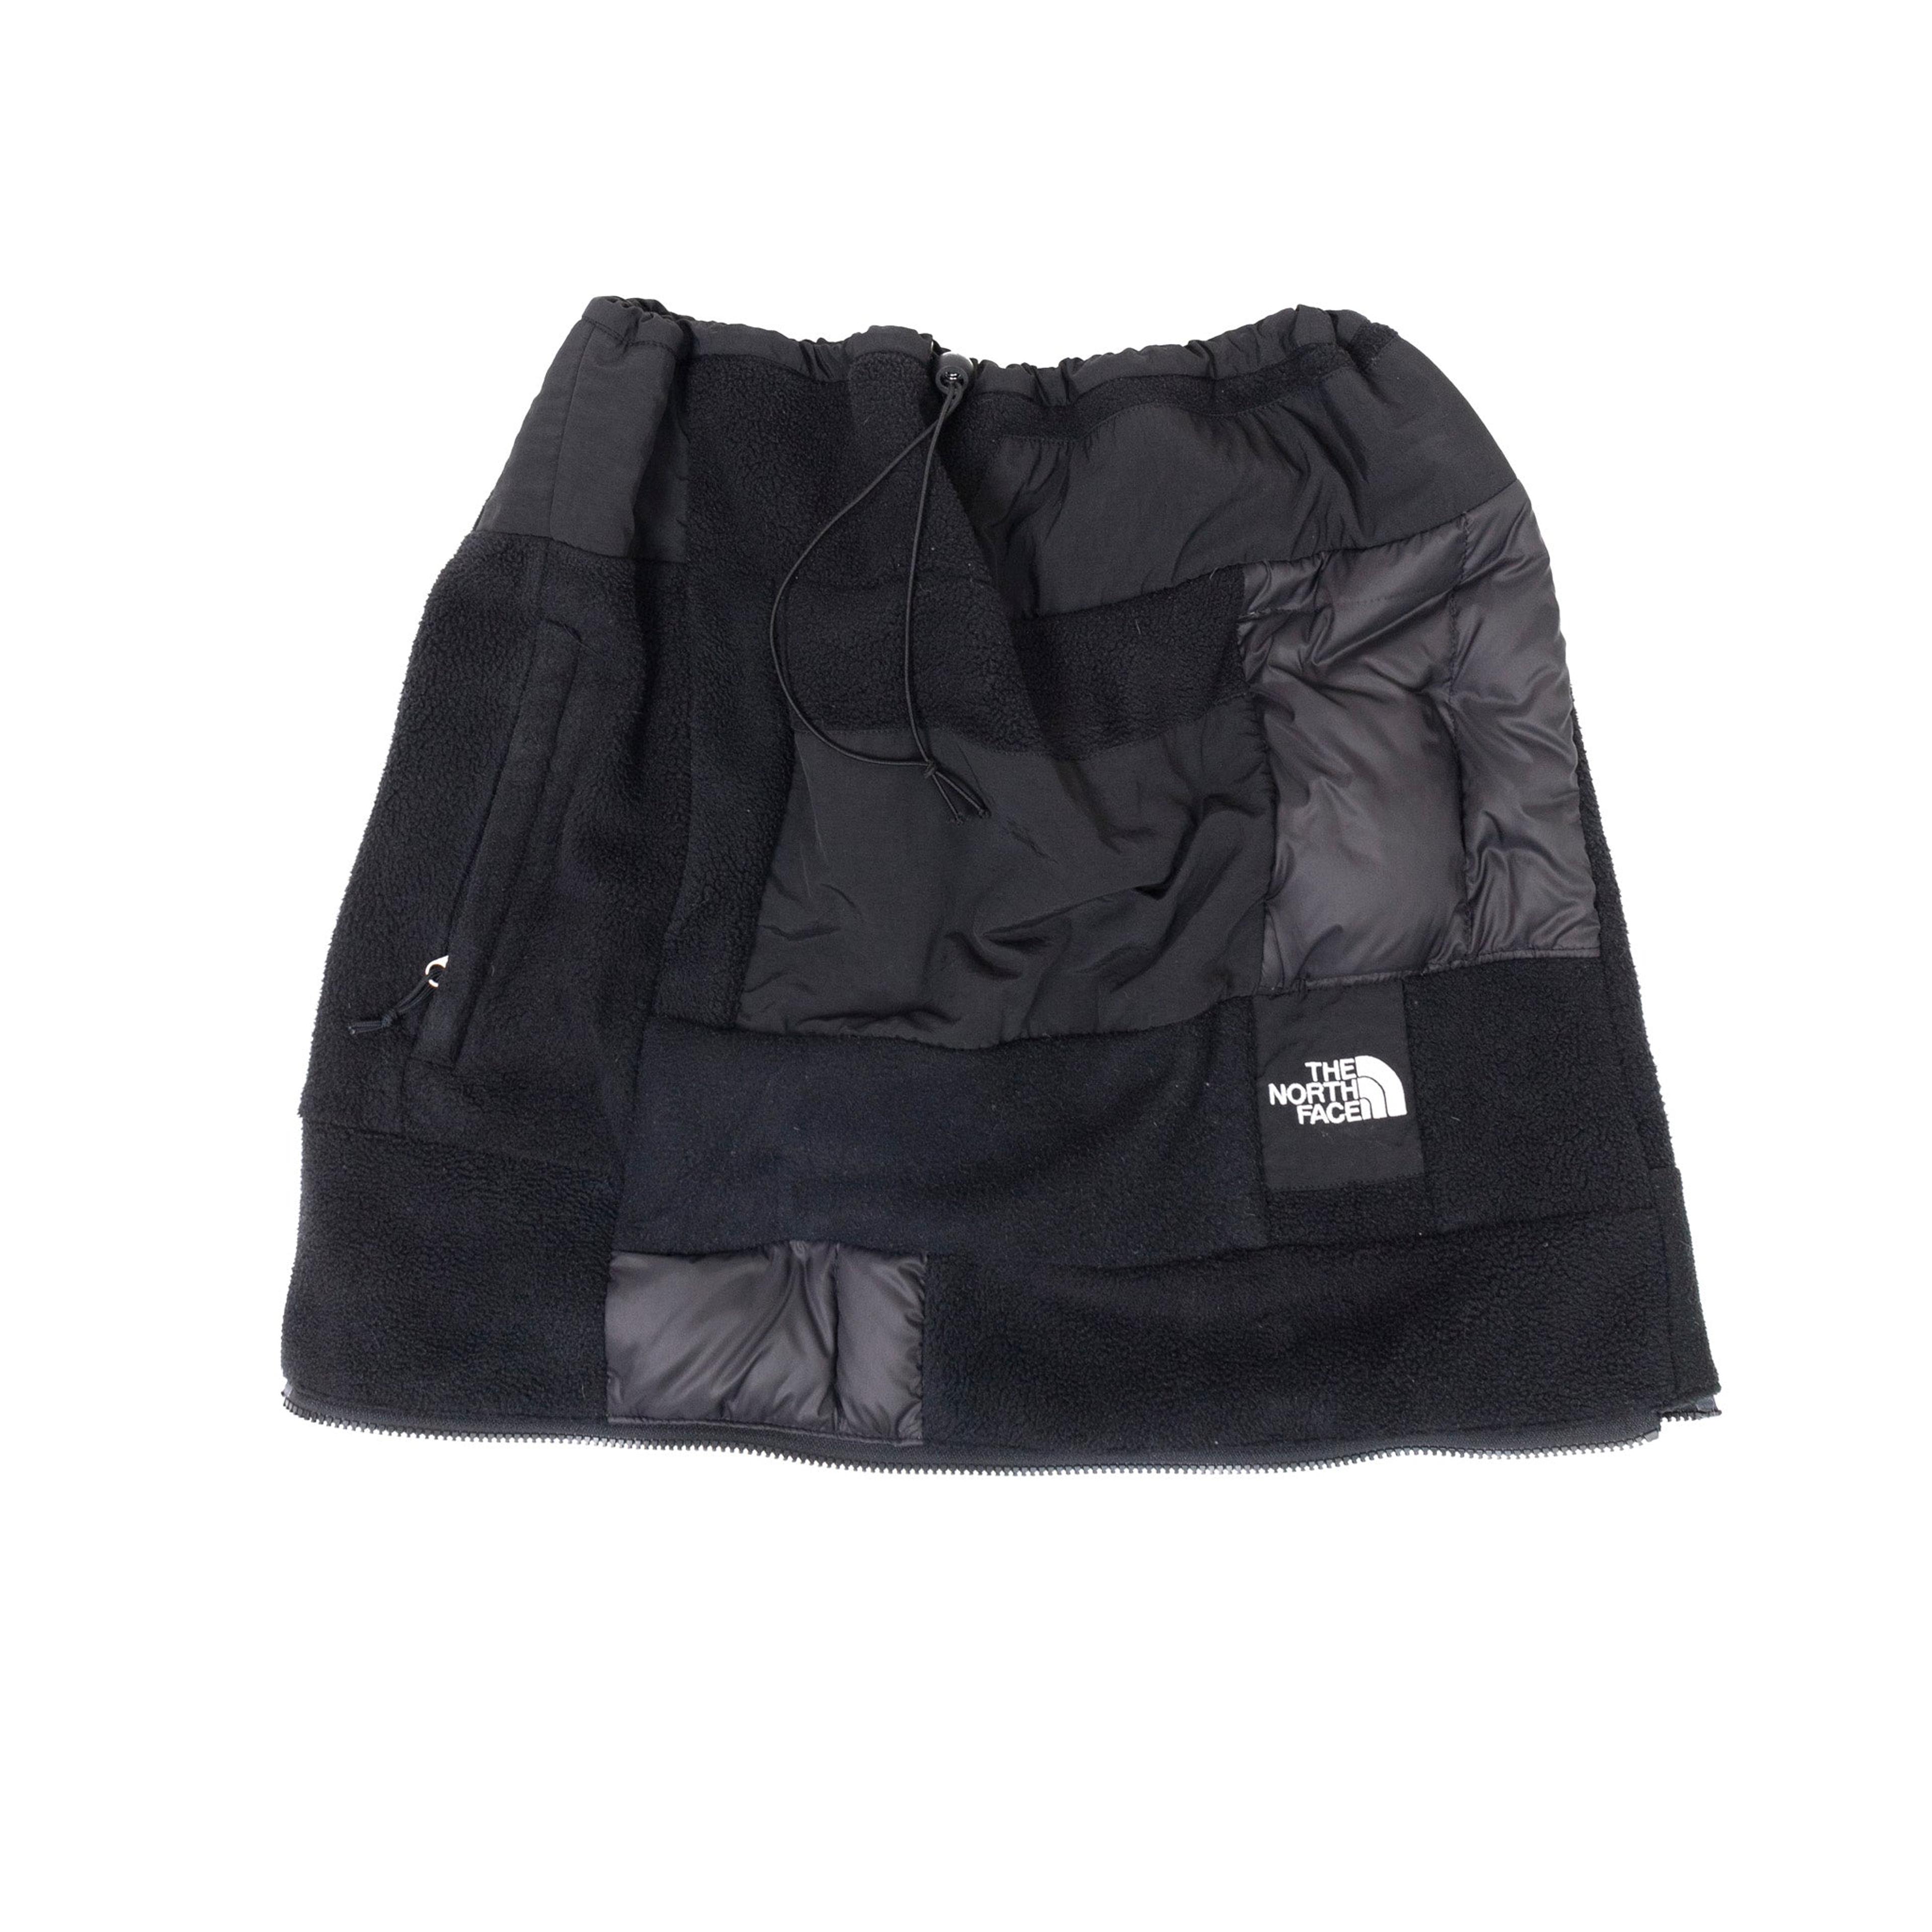 Alternate View 7 of VT Rework: The North Face Technical Skirt